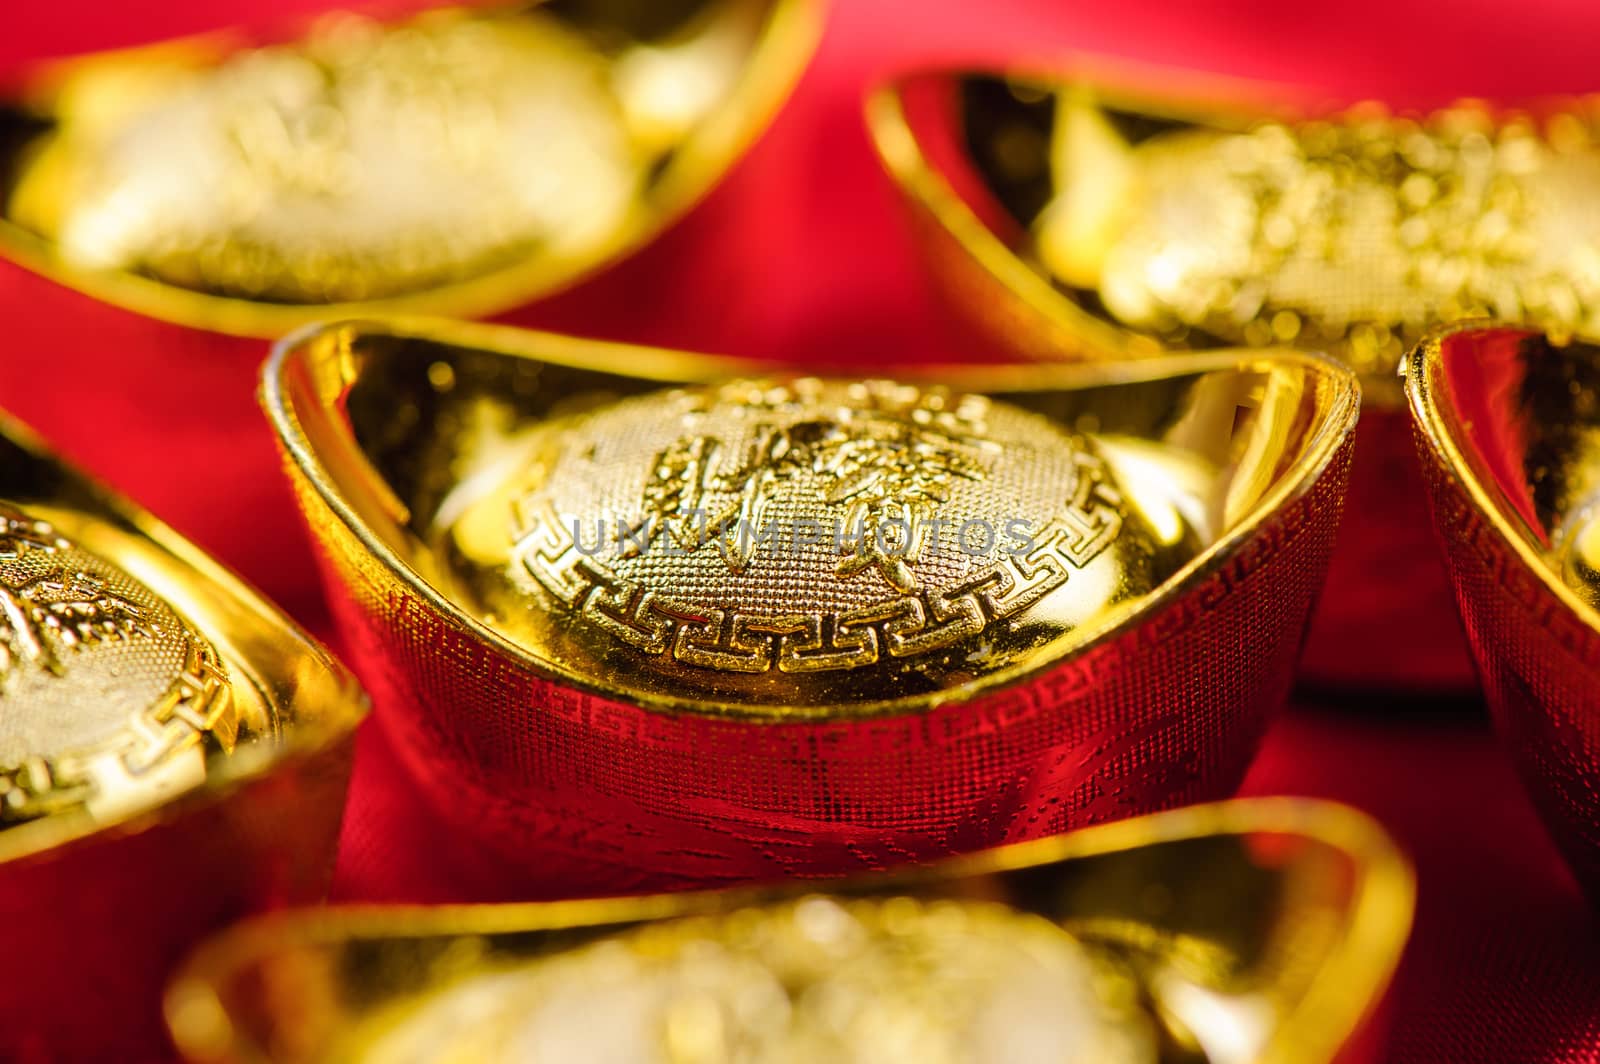 chinese gold ingot, chinese gold nugget. Chinese new year decoration concept.